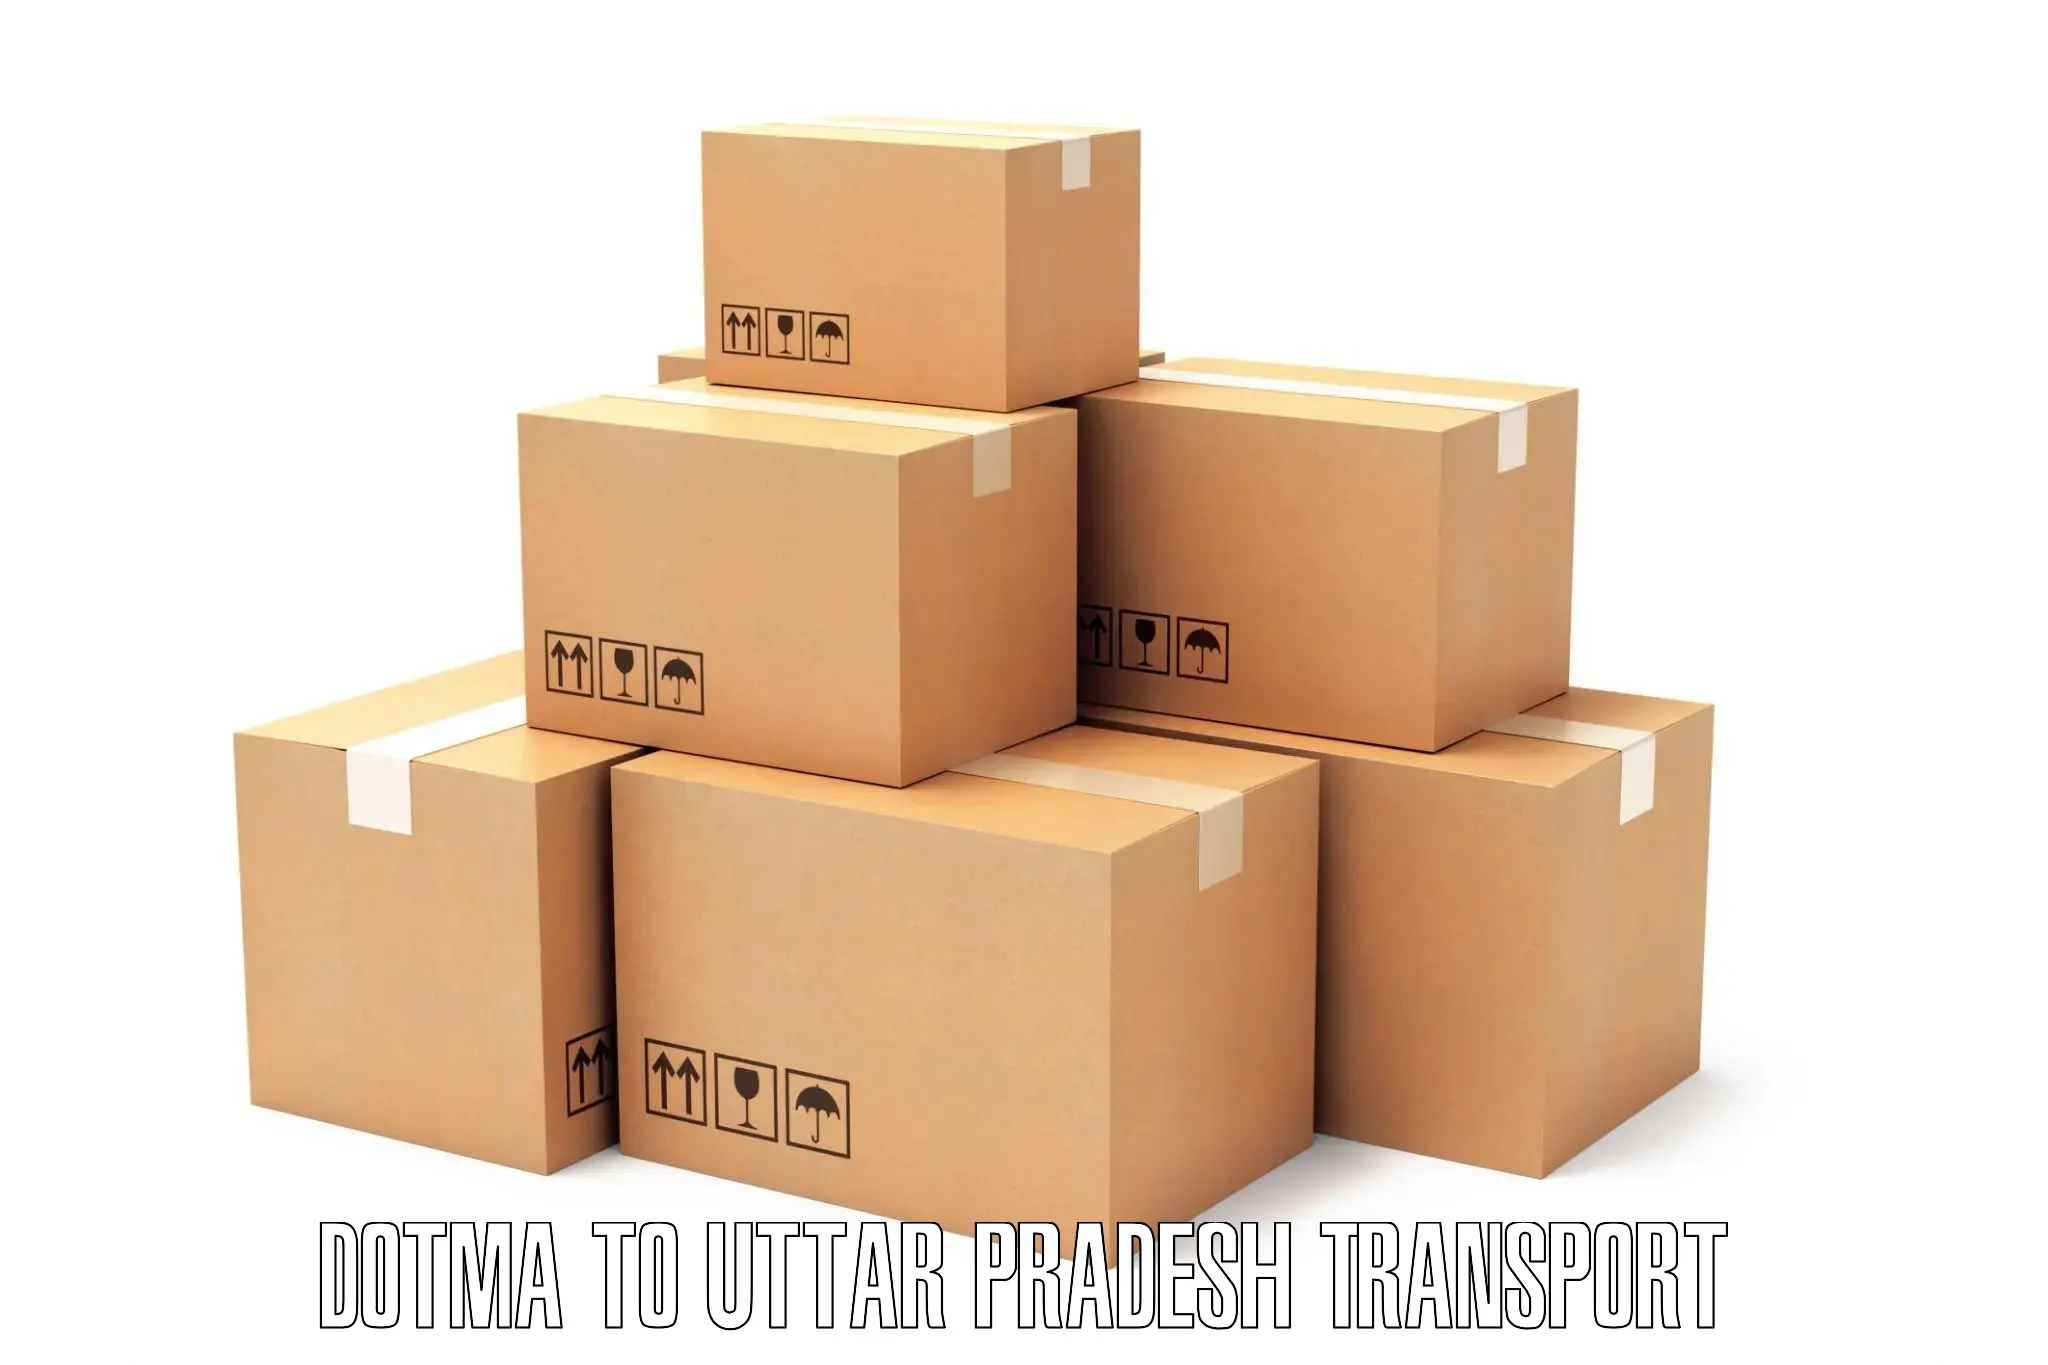 Best transport services in India Dotma to Rania